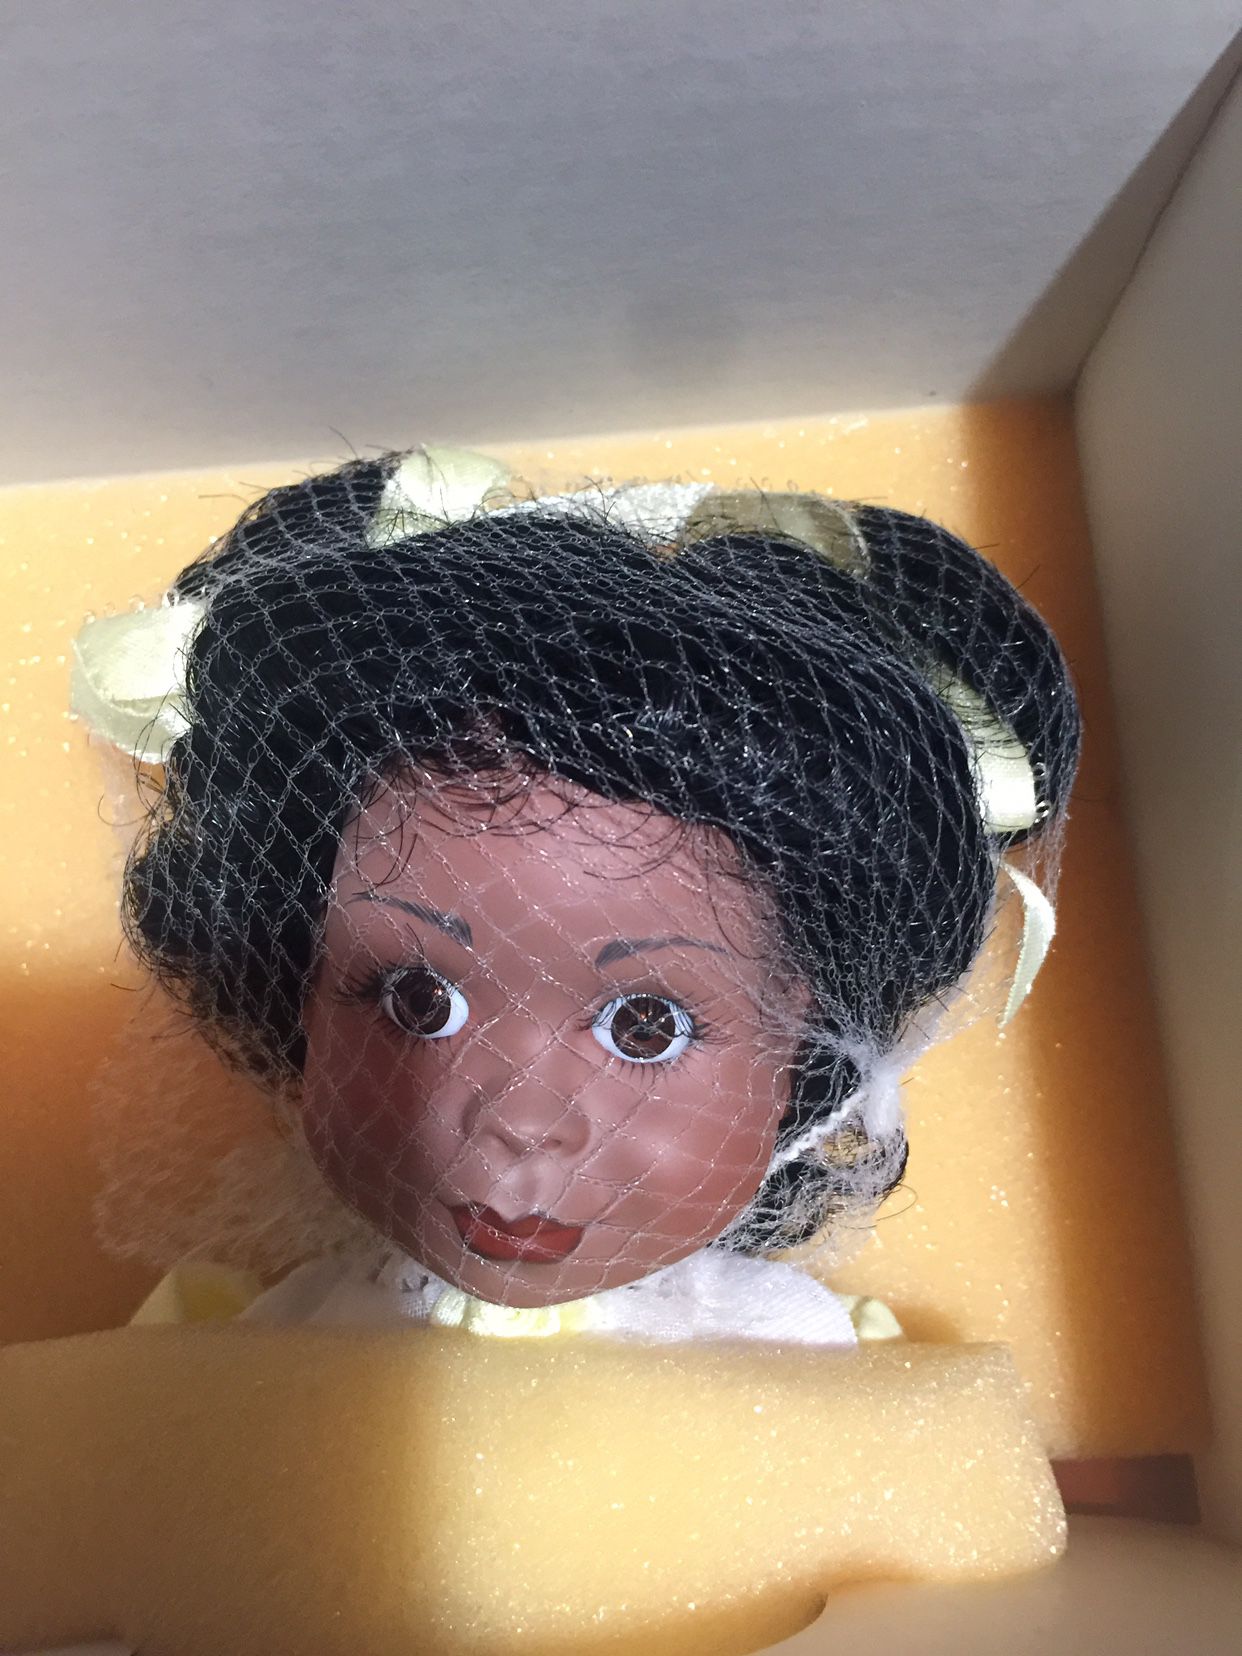 Estate Sale Collectible Doll In Box Large 